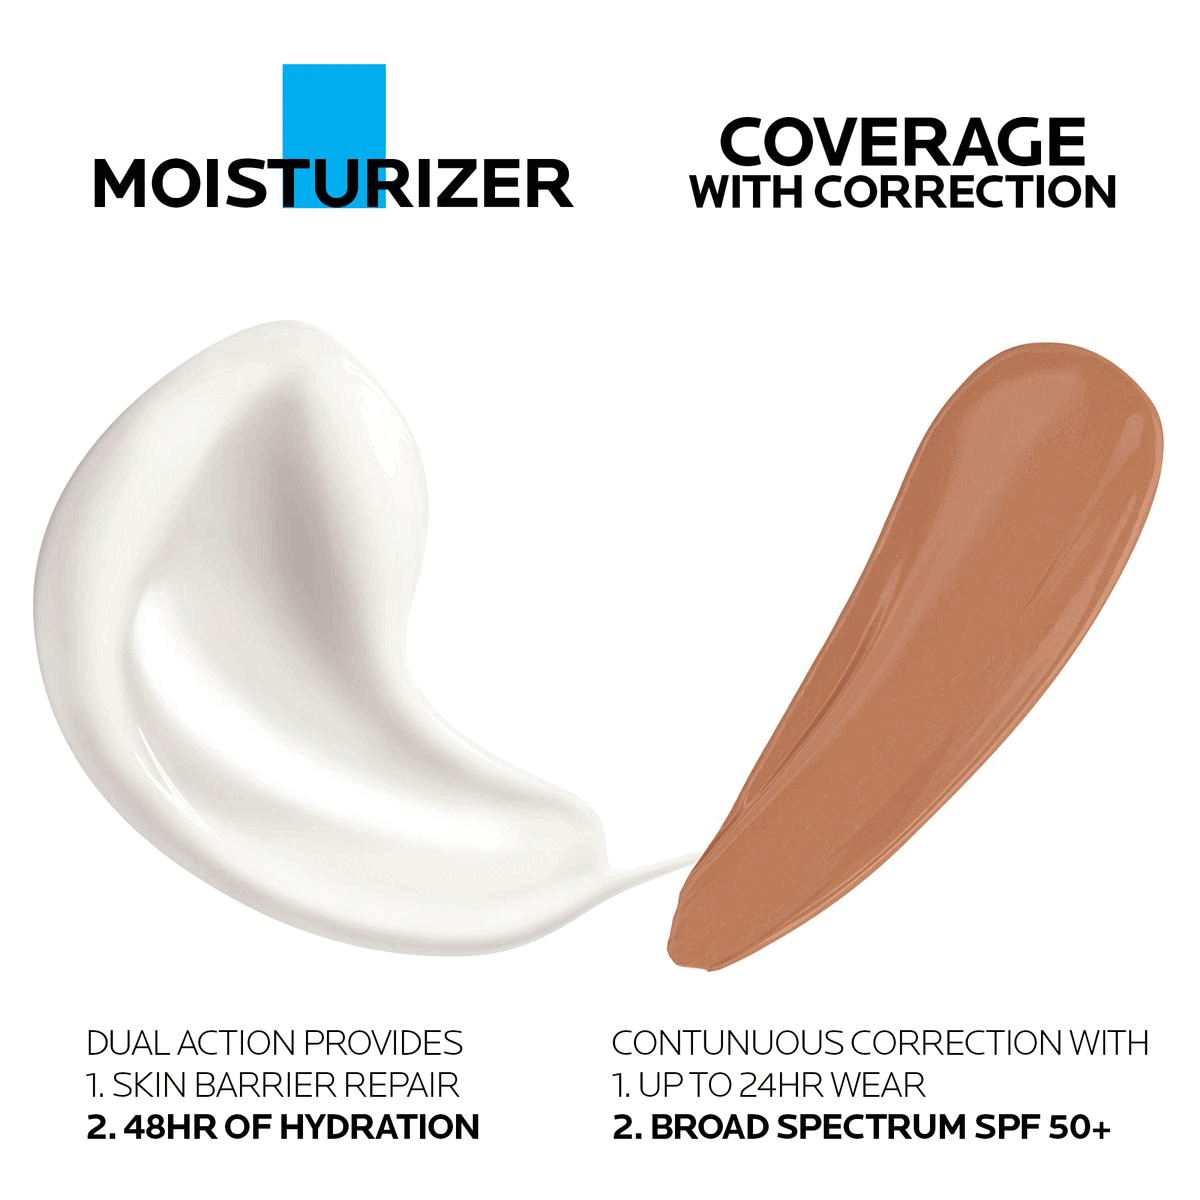 Image 1, MOISTURIZER COVERAGE WITH CORRECTION DUAL ACTION PROVIDES 1. SKIN BARRIER REPAIR 2.48HR OF HYDRATION CONTUNUOUS CORRECTION WITH 1. UP TO 24HR WEAR 2. BROAD SPECTRUM SPF 50+ Image 2, TOLERIANE DOUBLE REPAIR MOISTURIZER KEY DERMATOLOGICAL INGREDIENTS LA ROCHE-POSAY PREBIOTIC THERMAL SPRING WATER PREBIOTIC CERAMIDE-3 SKIN-IDENTICAL LIPID NIACINAMIDE WATER SOLUBLE VITAMIN Image 3, CC CREAM COVERS: Redness, Discoloration, Hyperpigmentation, Dark Spots, Age Sports Image 4, 43N Image 5, PRODUCT SAFETY STANDARDS Dermatologist tested for safety Sensitive Skin Tested Fragrance-Free Paraben-Free Oil-Free Non-Comedogenic Allergy Tested Image 6, APPLY IN GENTLE CIRCULAR MOTIONS AFTER CLEANSING AND TONING, APPLY CC CREAM WITH FINGERTIPS, BRUSH, OR SPONGE FROM THE CENTER OF FACE OUTWARDS